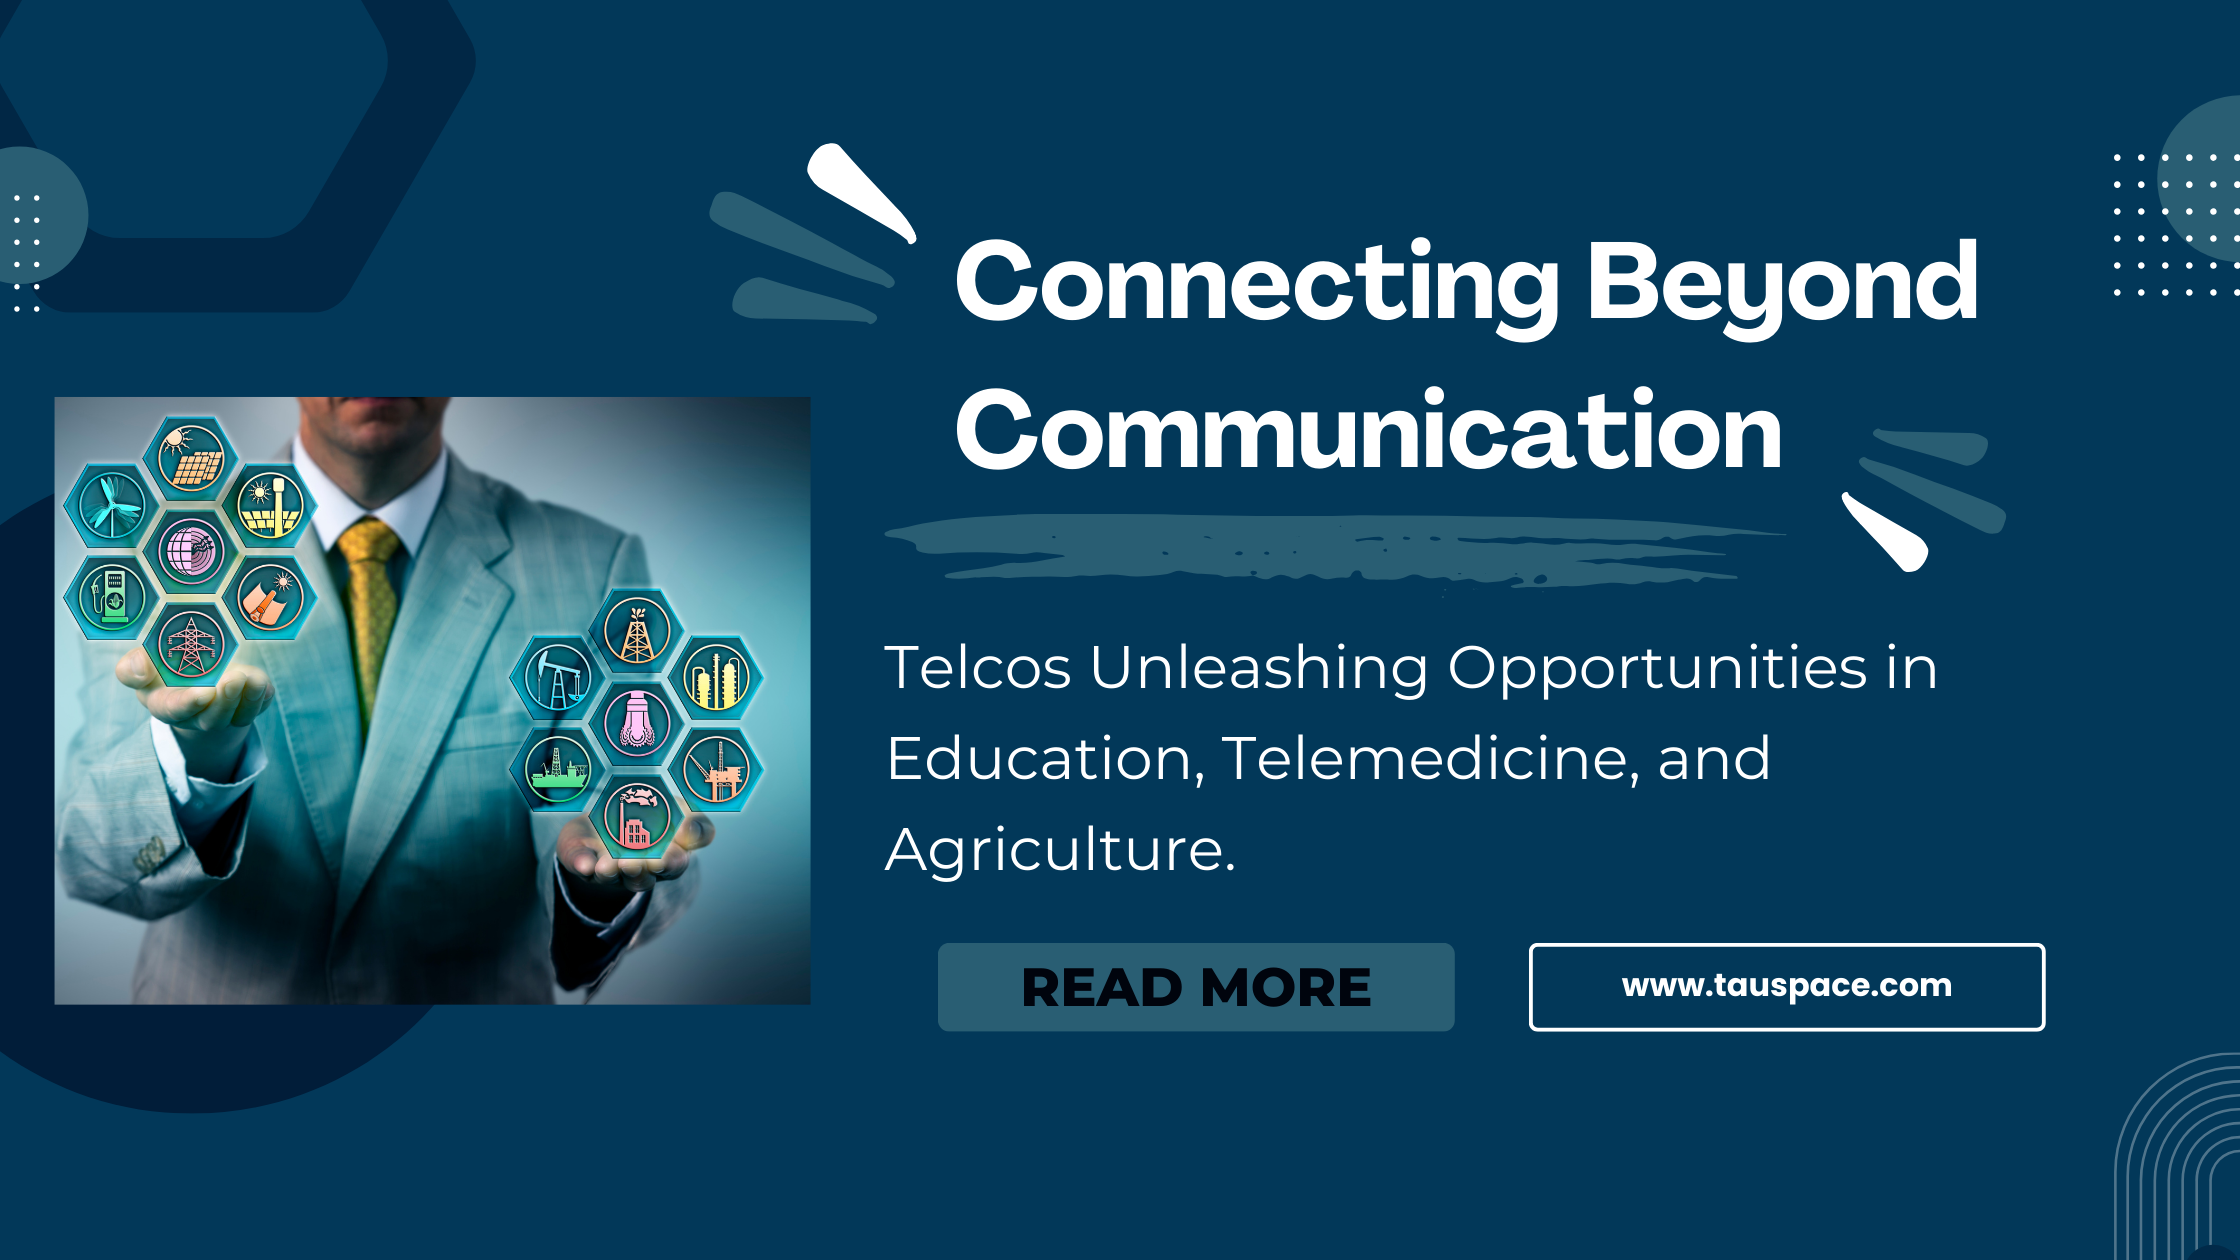 Connecting Beyond Communication: Telcos Unleashing Opportunities in Education, Telemedicine, and Agriculture